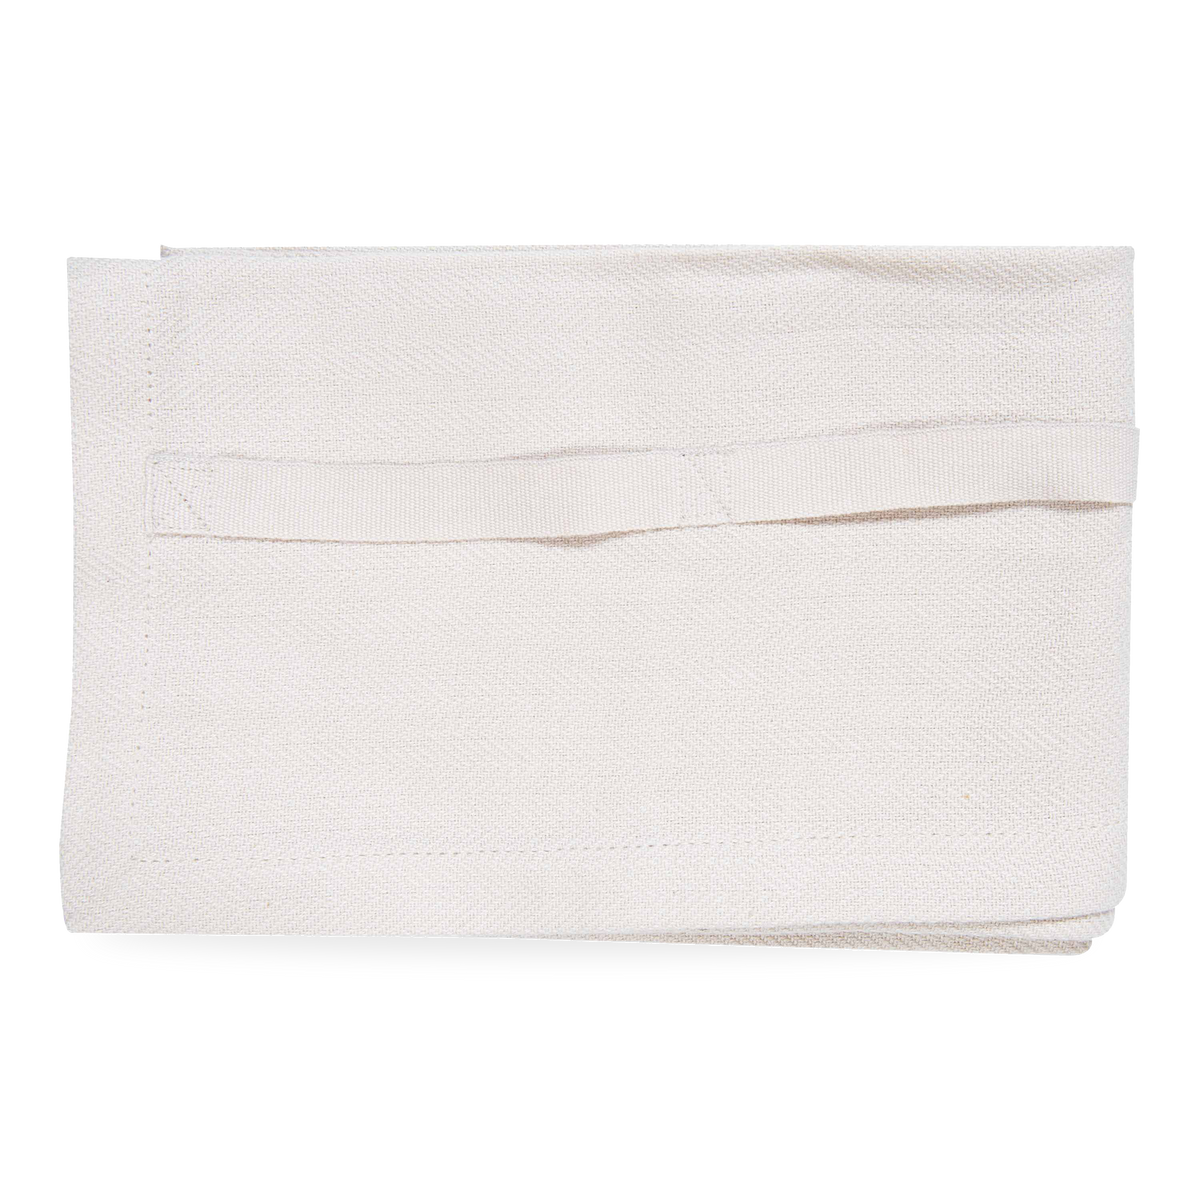 Woven with certified high-quality fabrics, this Organic Cotton Kitchen Towel is designed to absorb, to last and to add a modern touch to your kitchen collection.